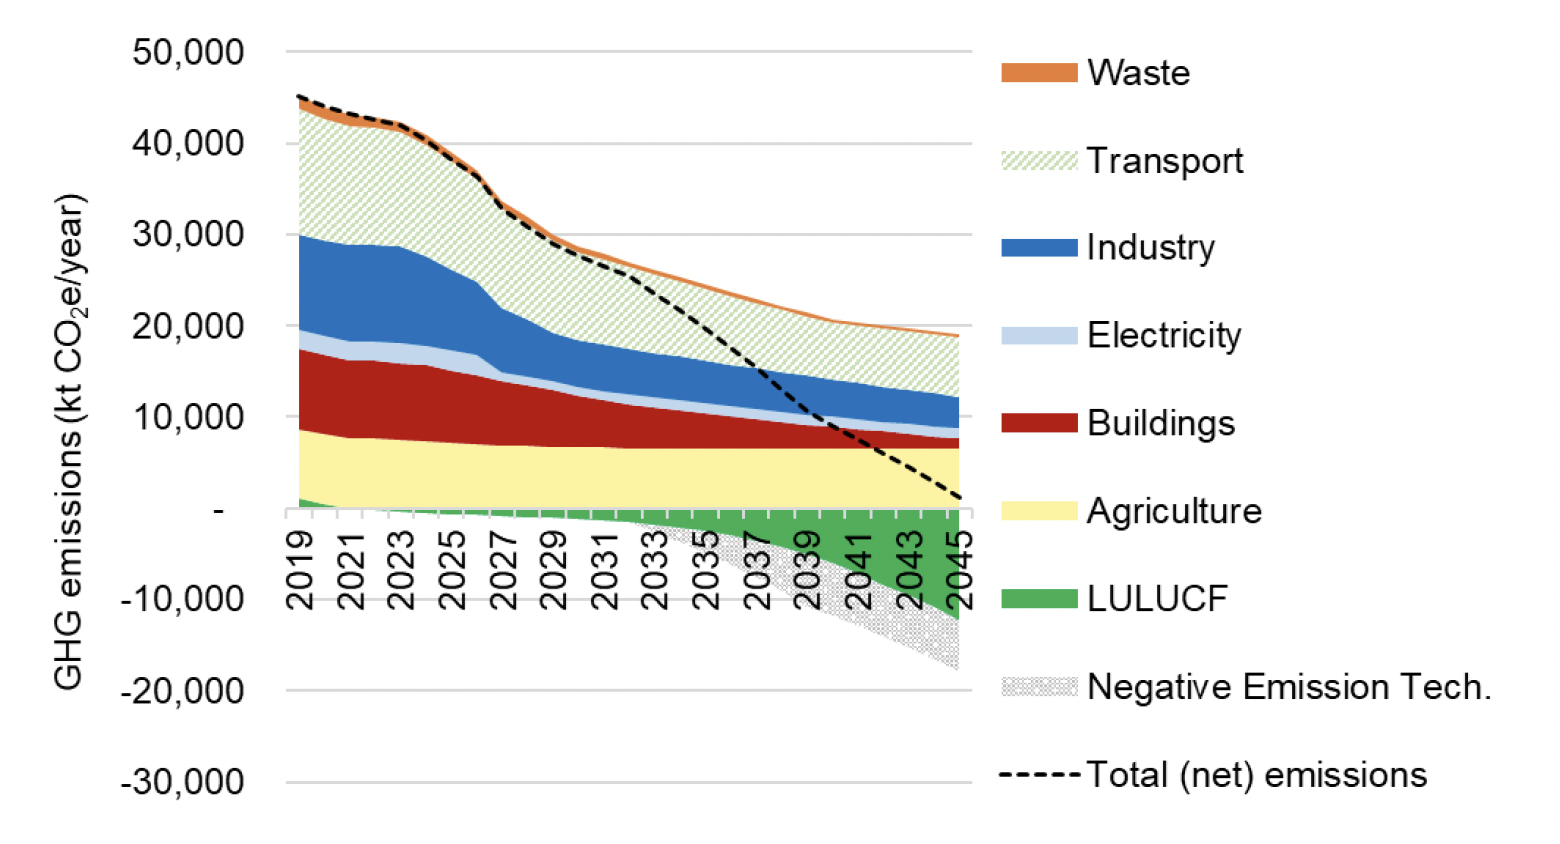 A line and area graph showing the overall reductions in emissions with the share for each sector.